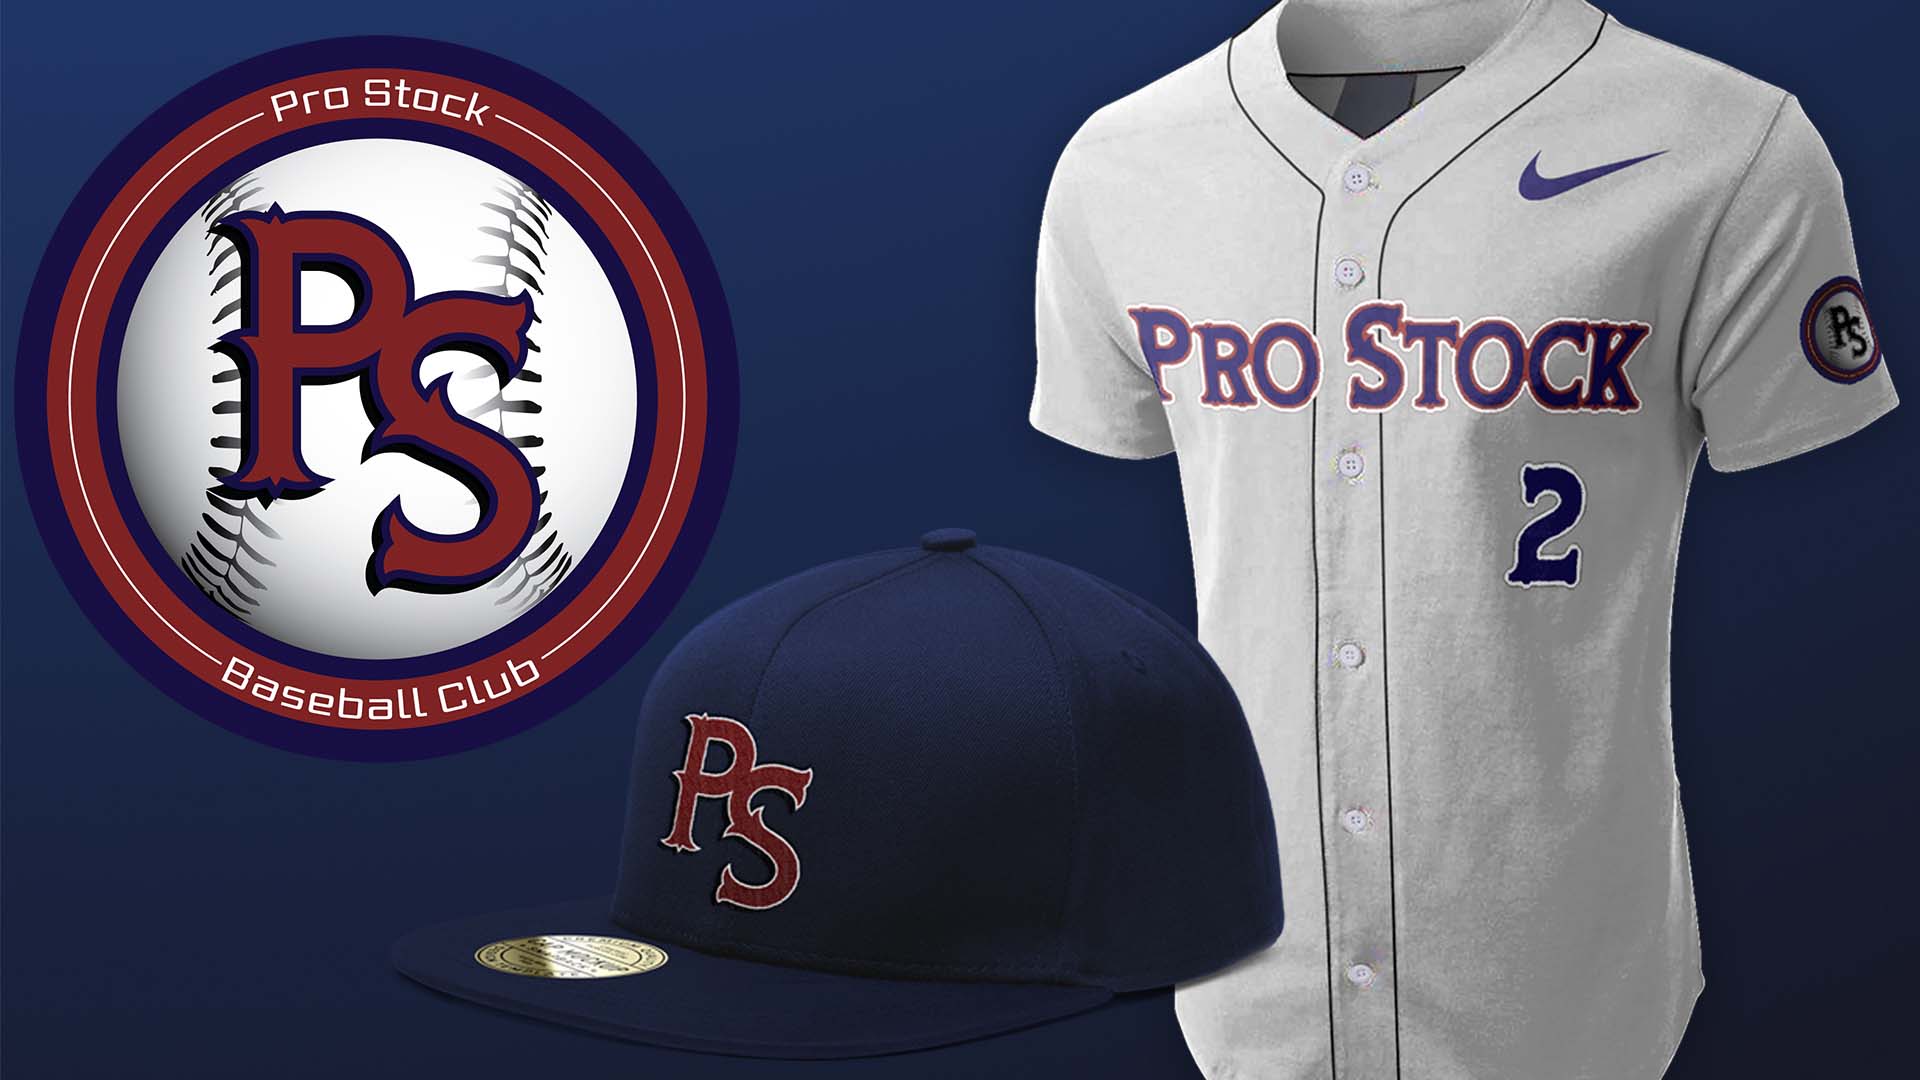  / “Pro Stock Baseball Club” Corporate Branding, various sizes and media, 2021. This showcase of branding displays the logo, as well as multiple assets that will be used to identify the Pro Stock Baseball Club."